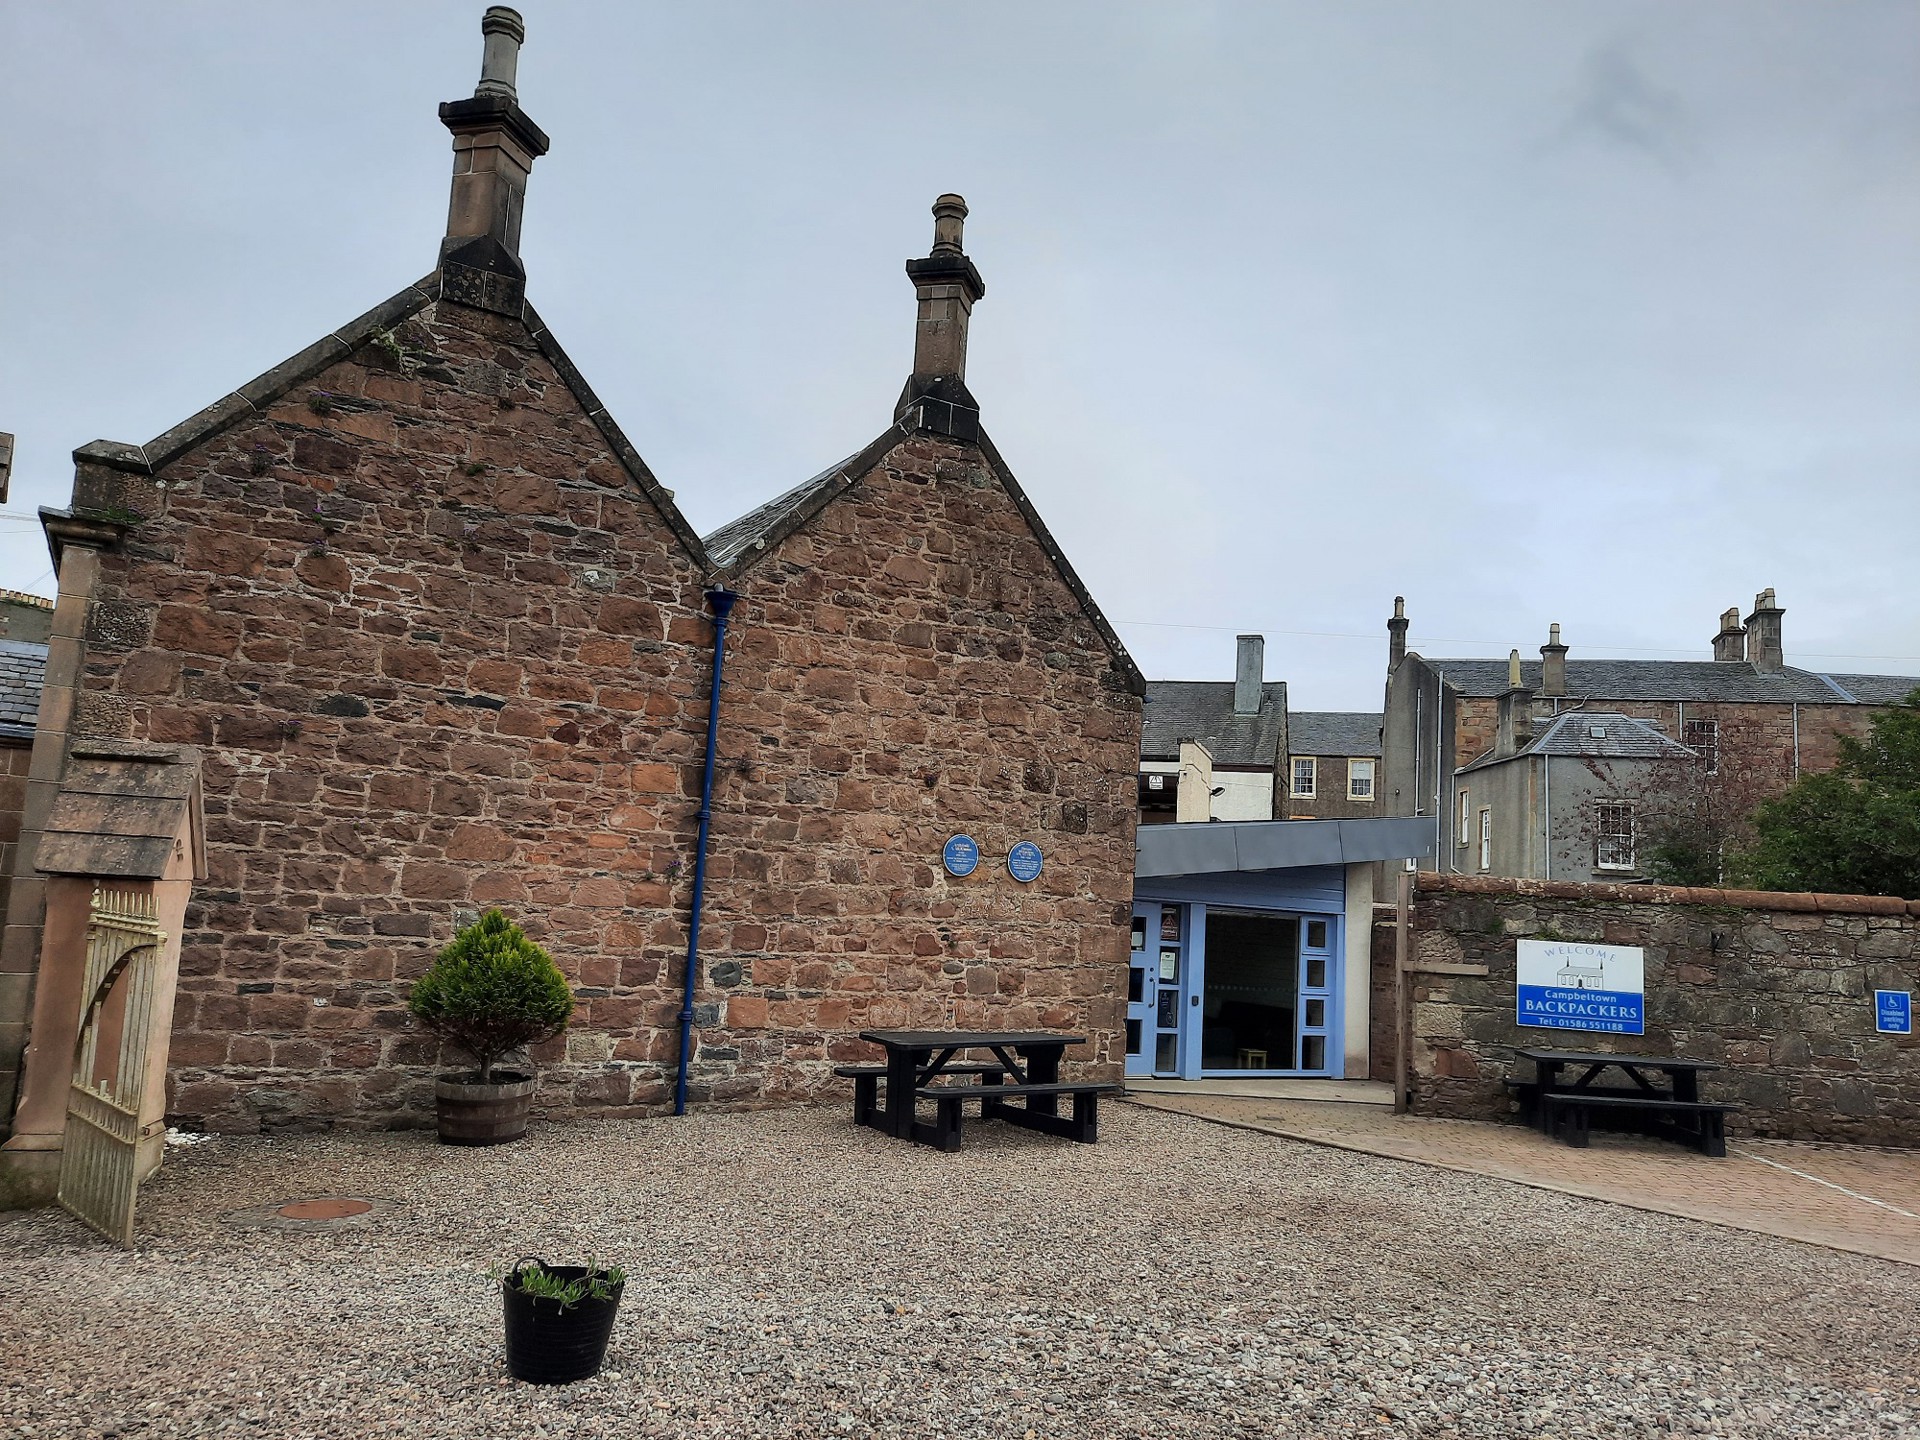 Background image - Campbeltown Backpackers